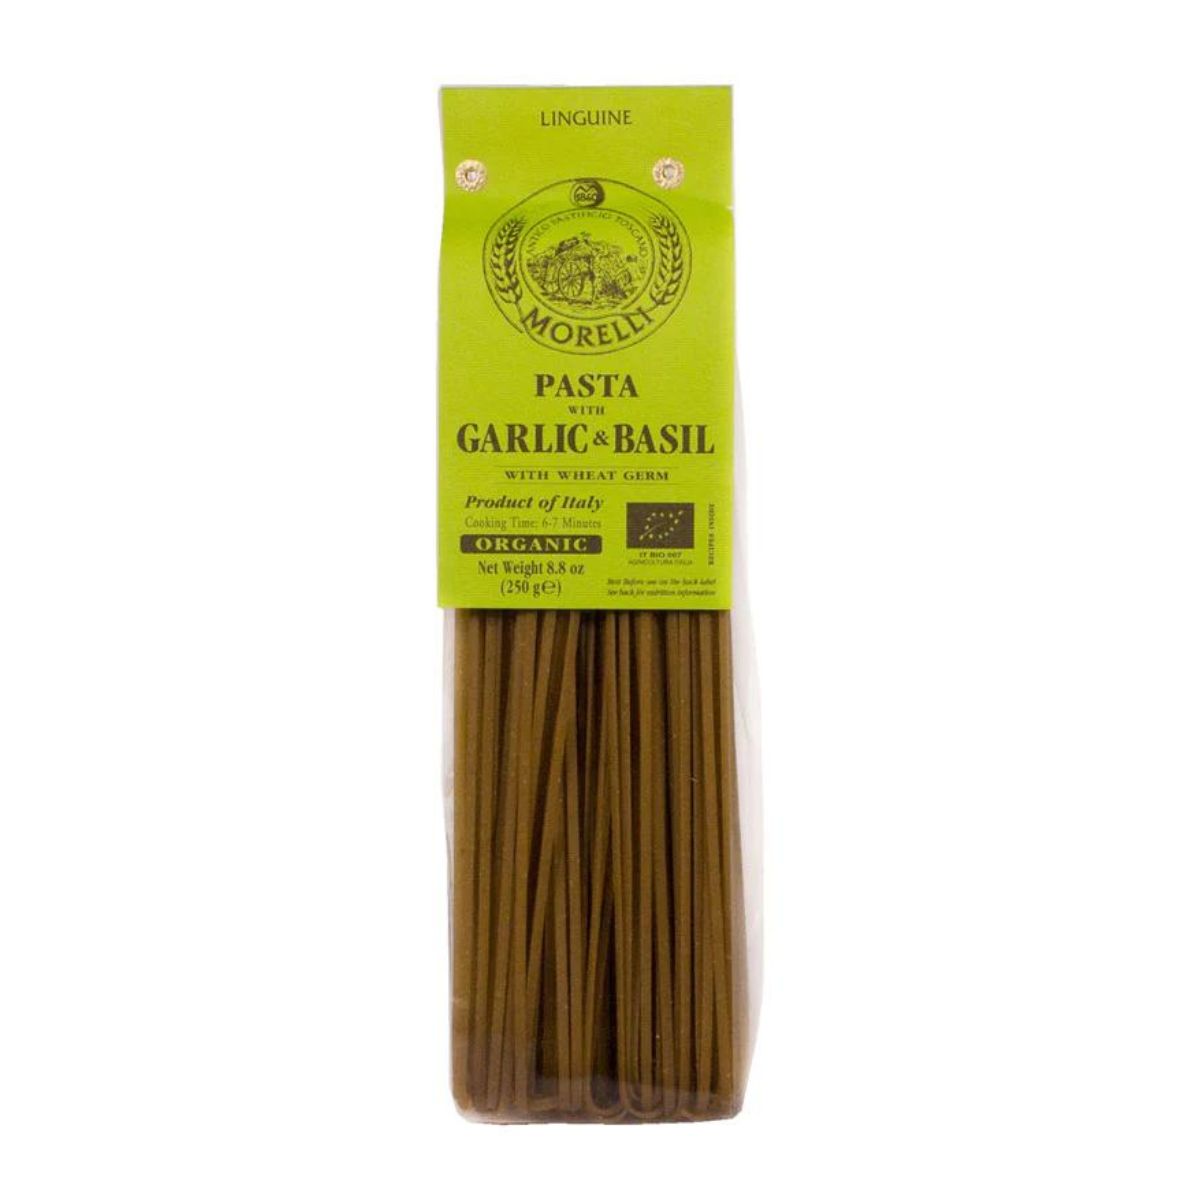 Organic Linguine with Garlic & Basil- Perfect to serve with Meyer Lemon Olive Oil